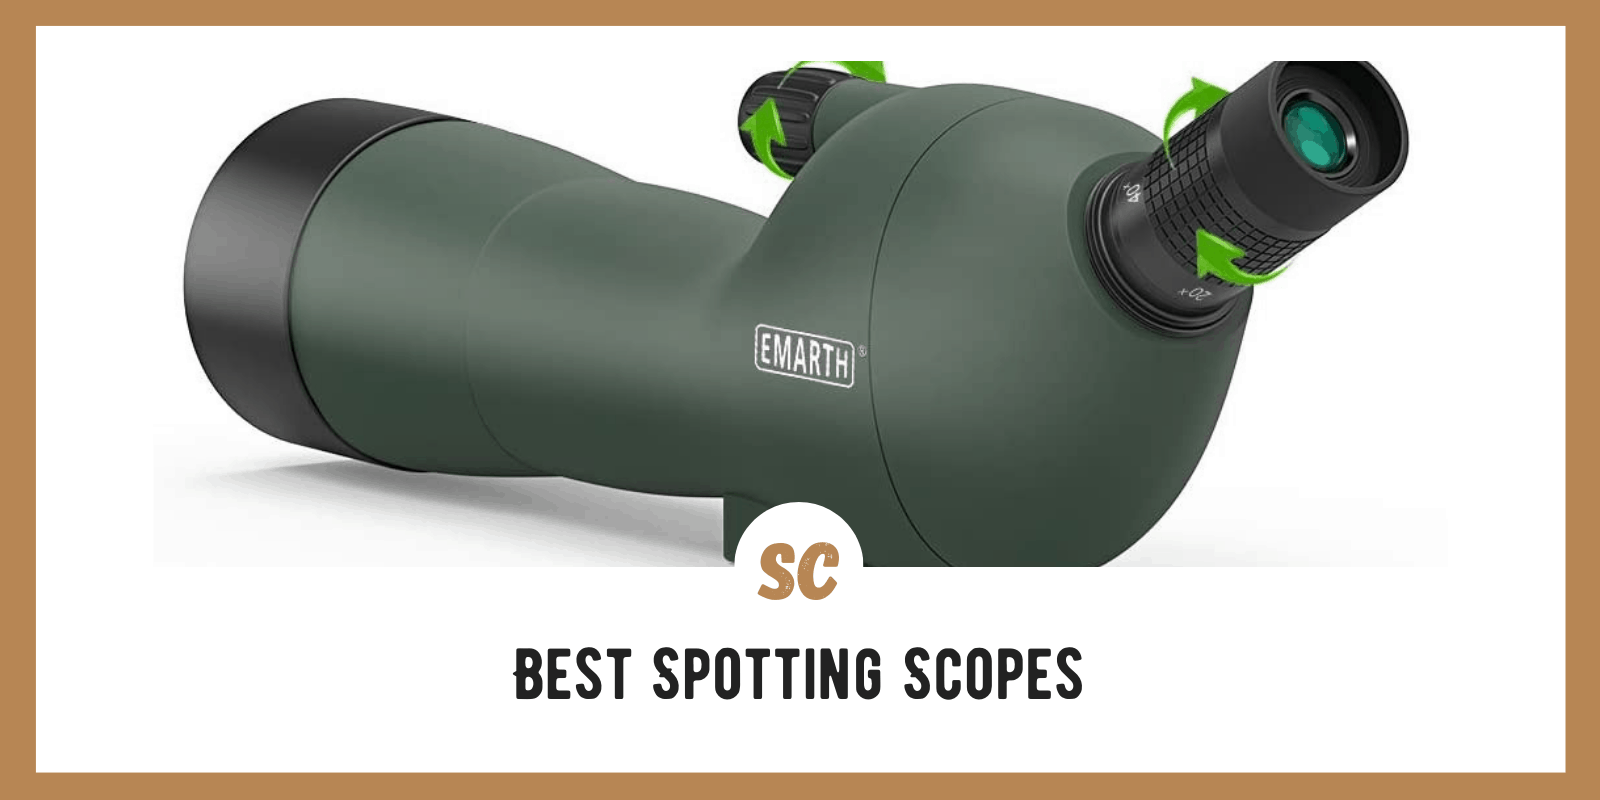 Ins and Outs of The Best Spotting Scopes: My Experiences